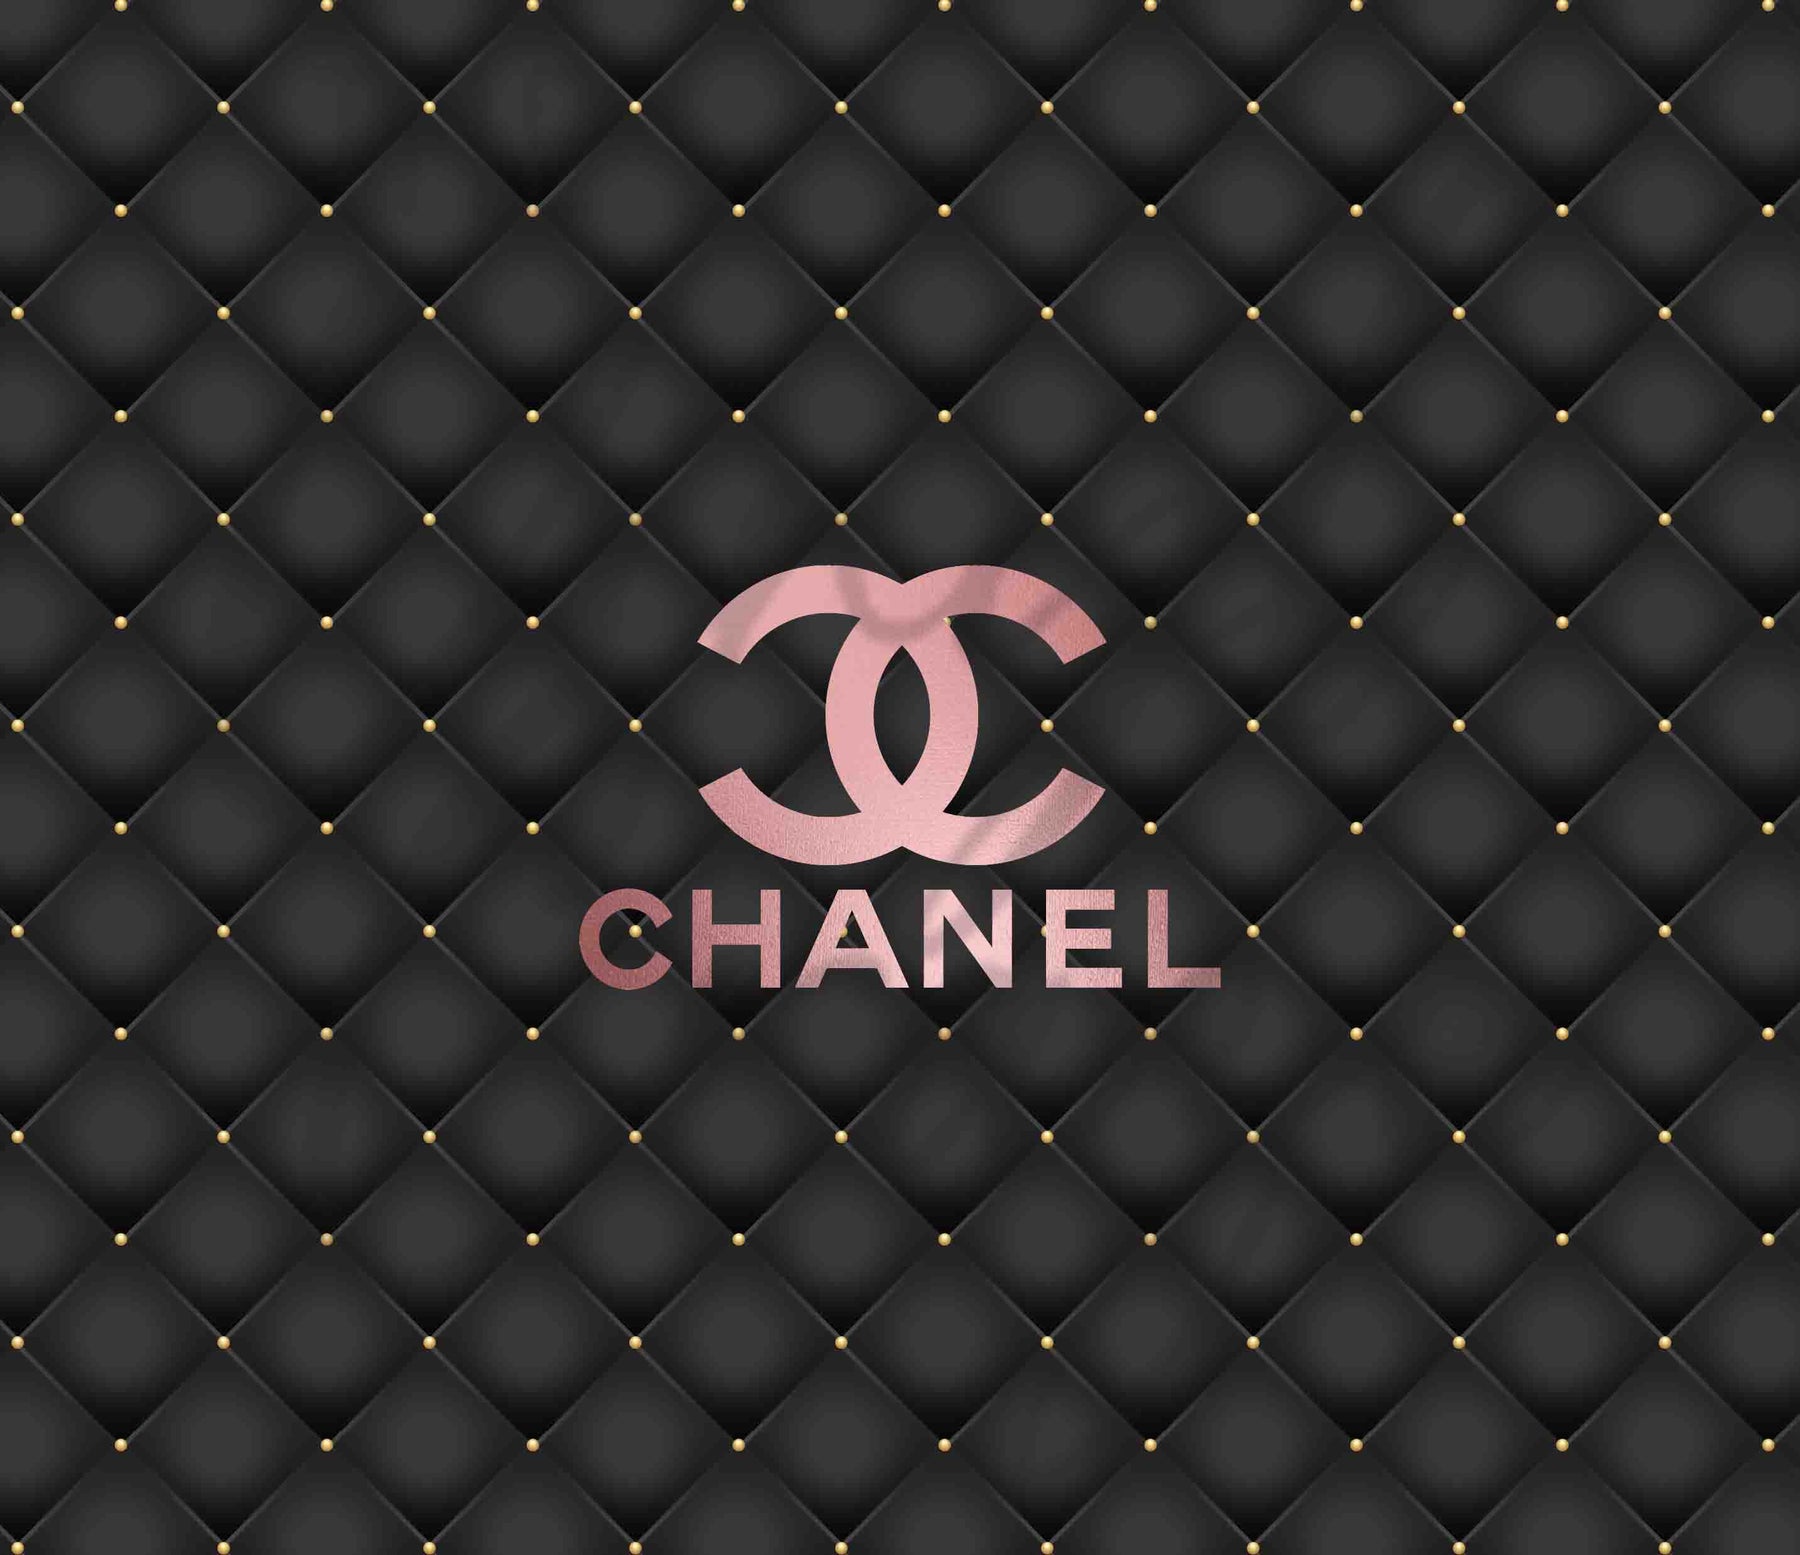 Image by Kimberly Rochin  Louis vuitton iphone wallpaper, Iphone